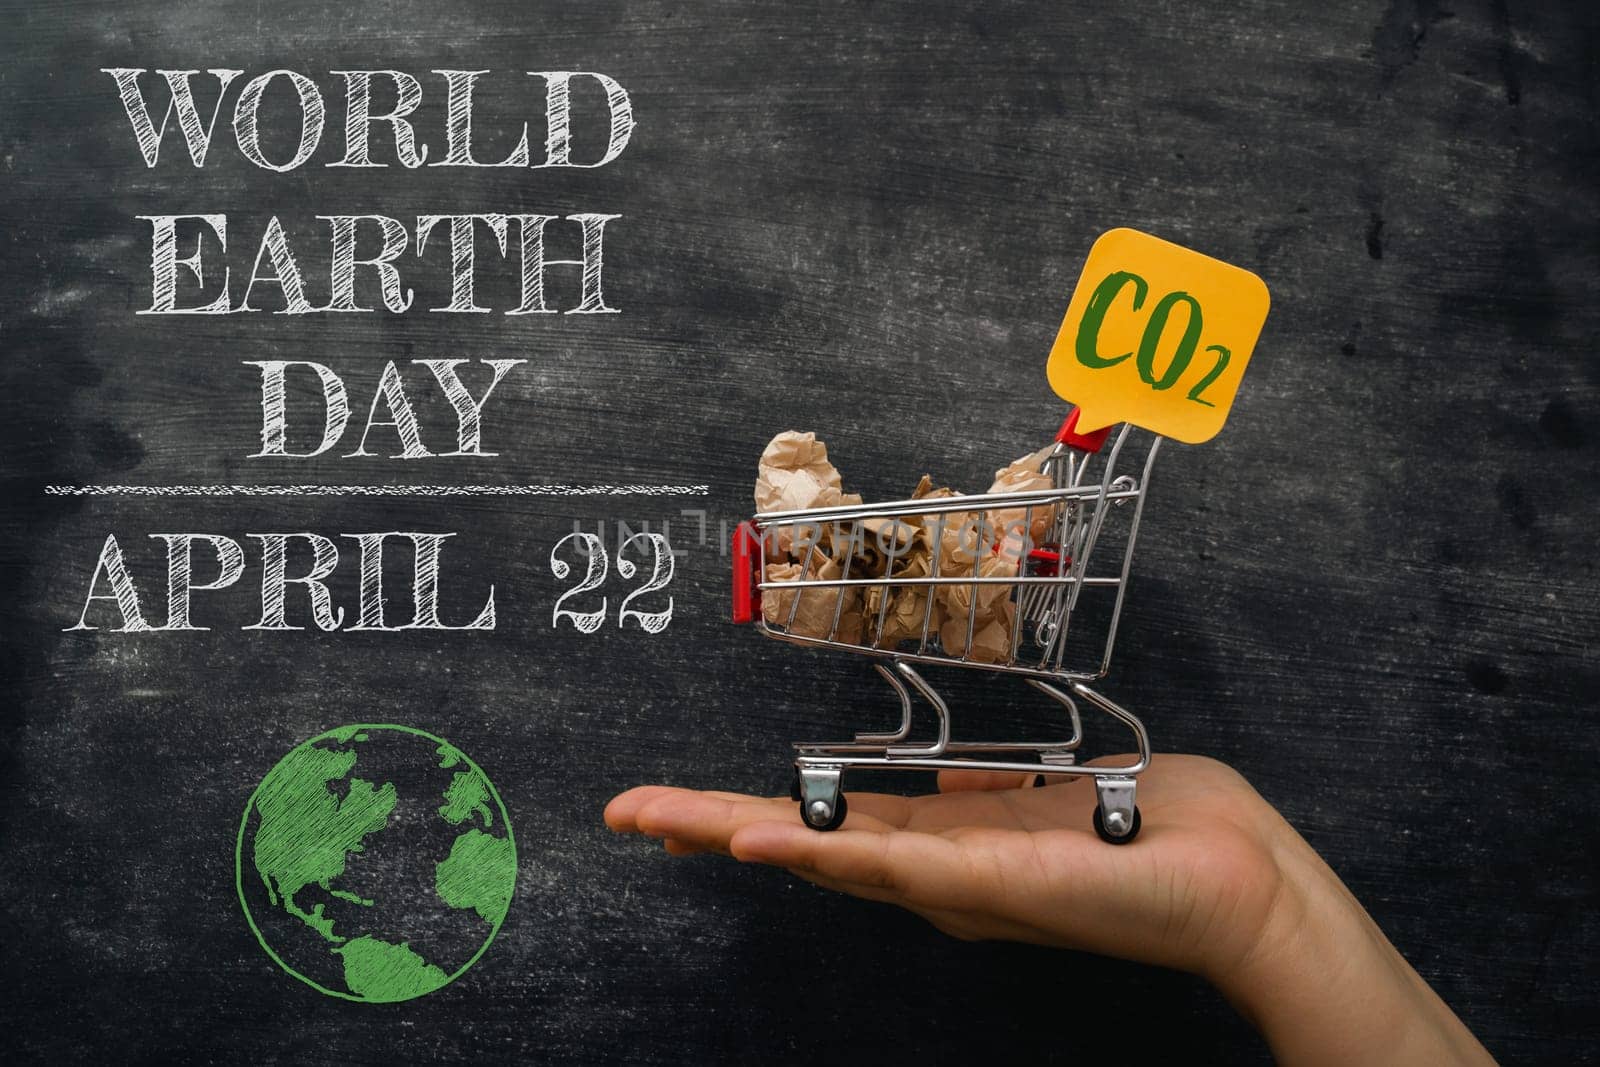 A hand holding a shopping cart with a sign that says CO2 on it. The cart is on a chalkboard with the words World Earth Day April 22